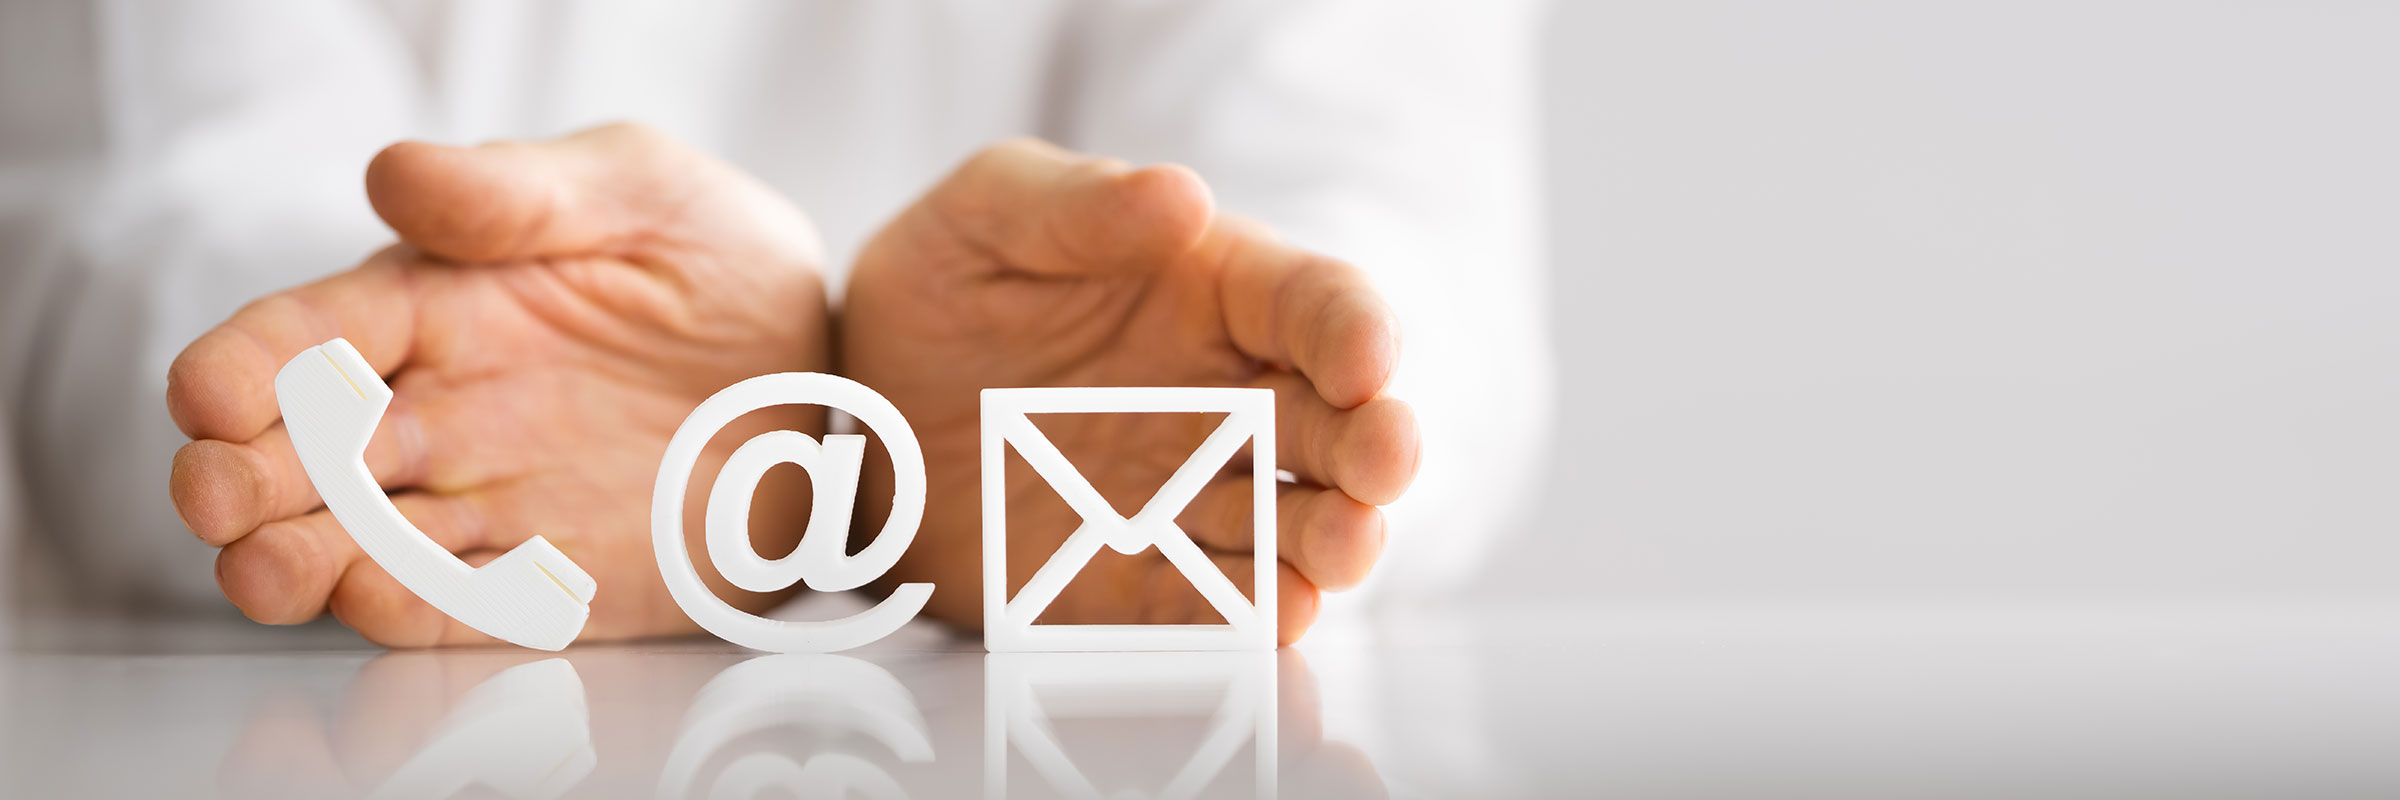 two hands holding telephone icon, email icon, and letter icon